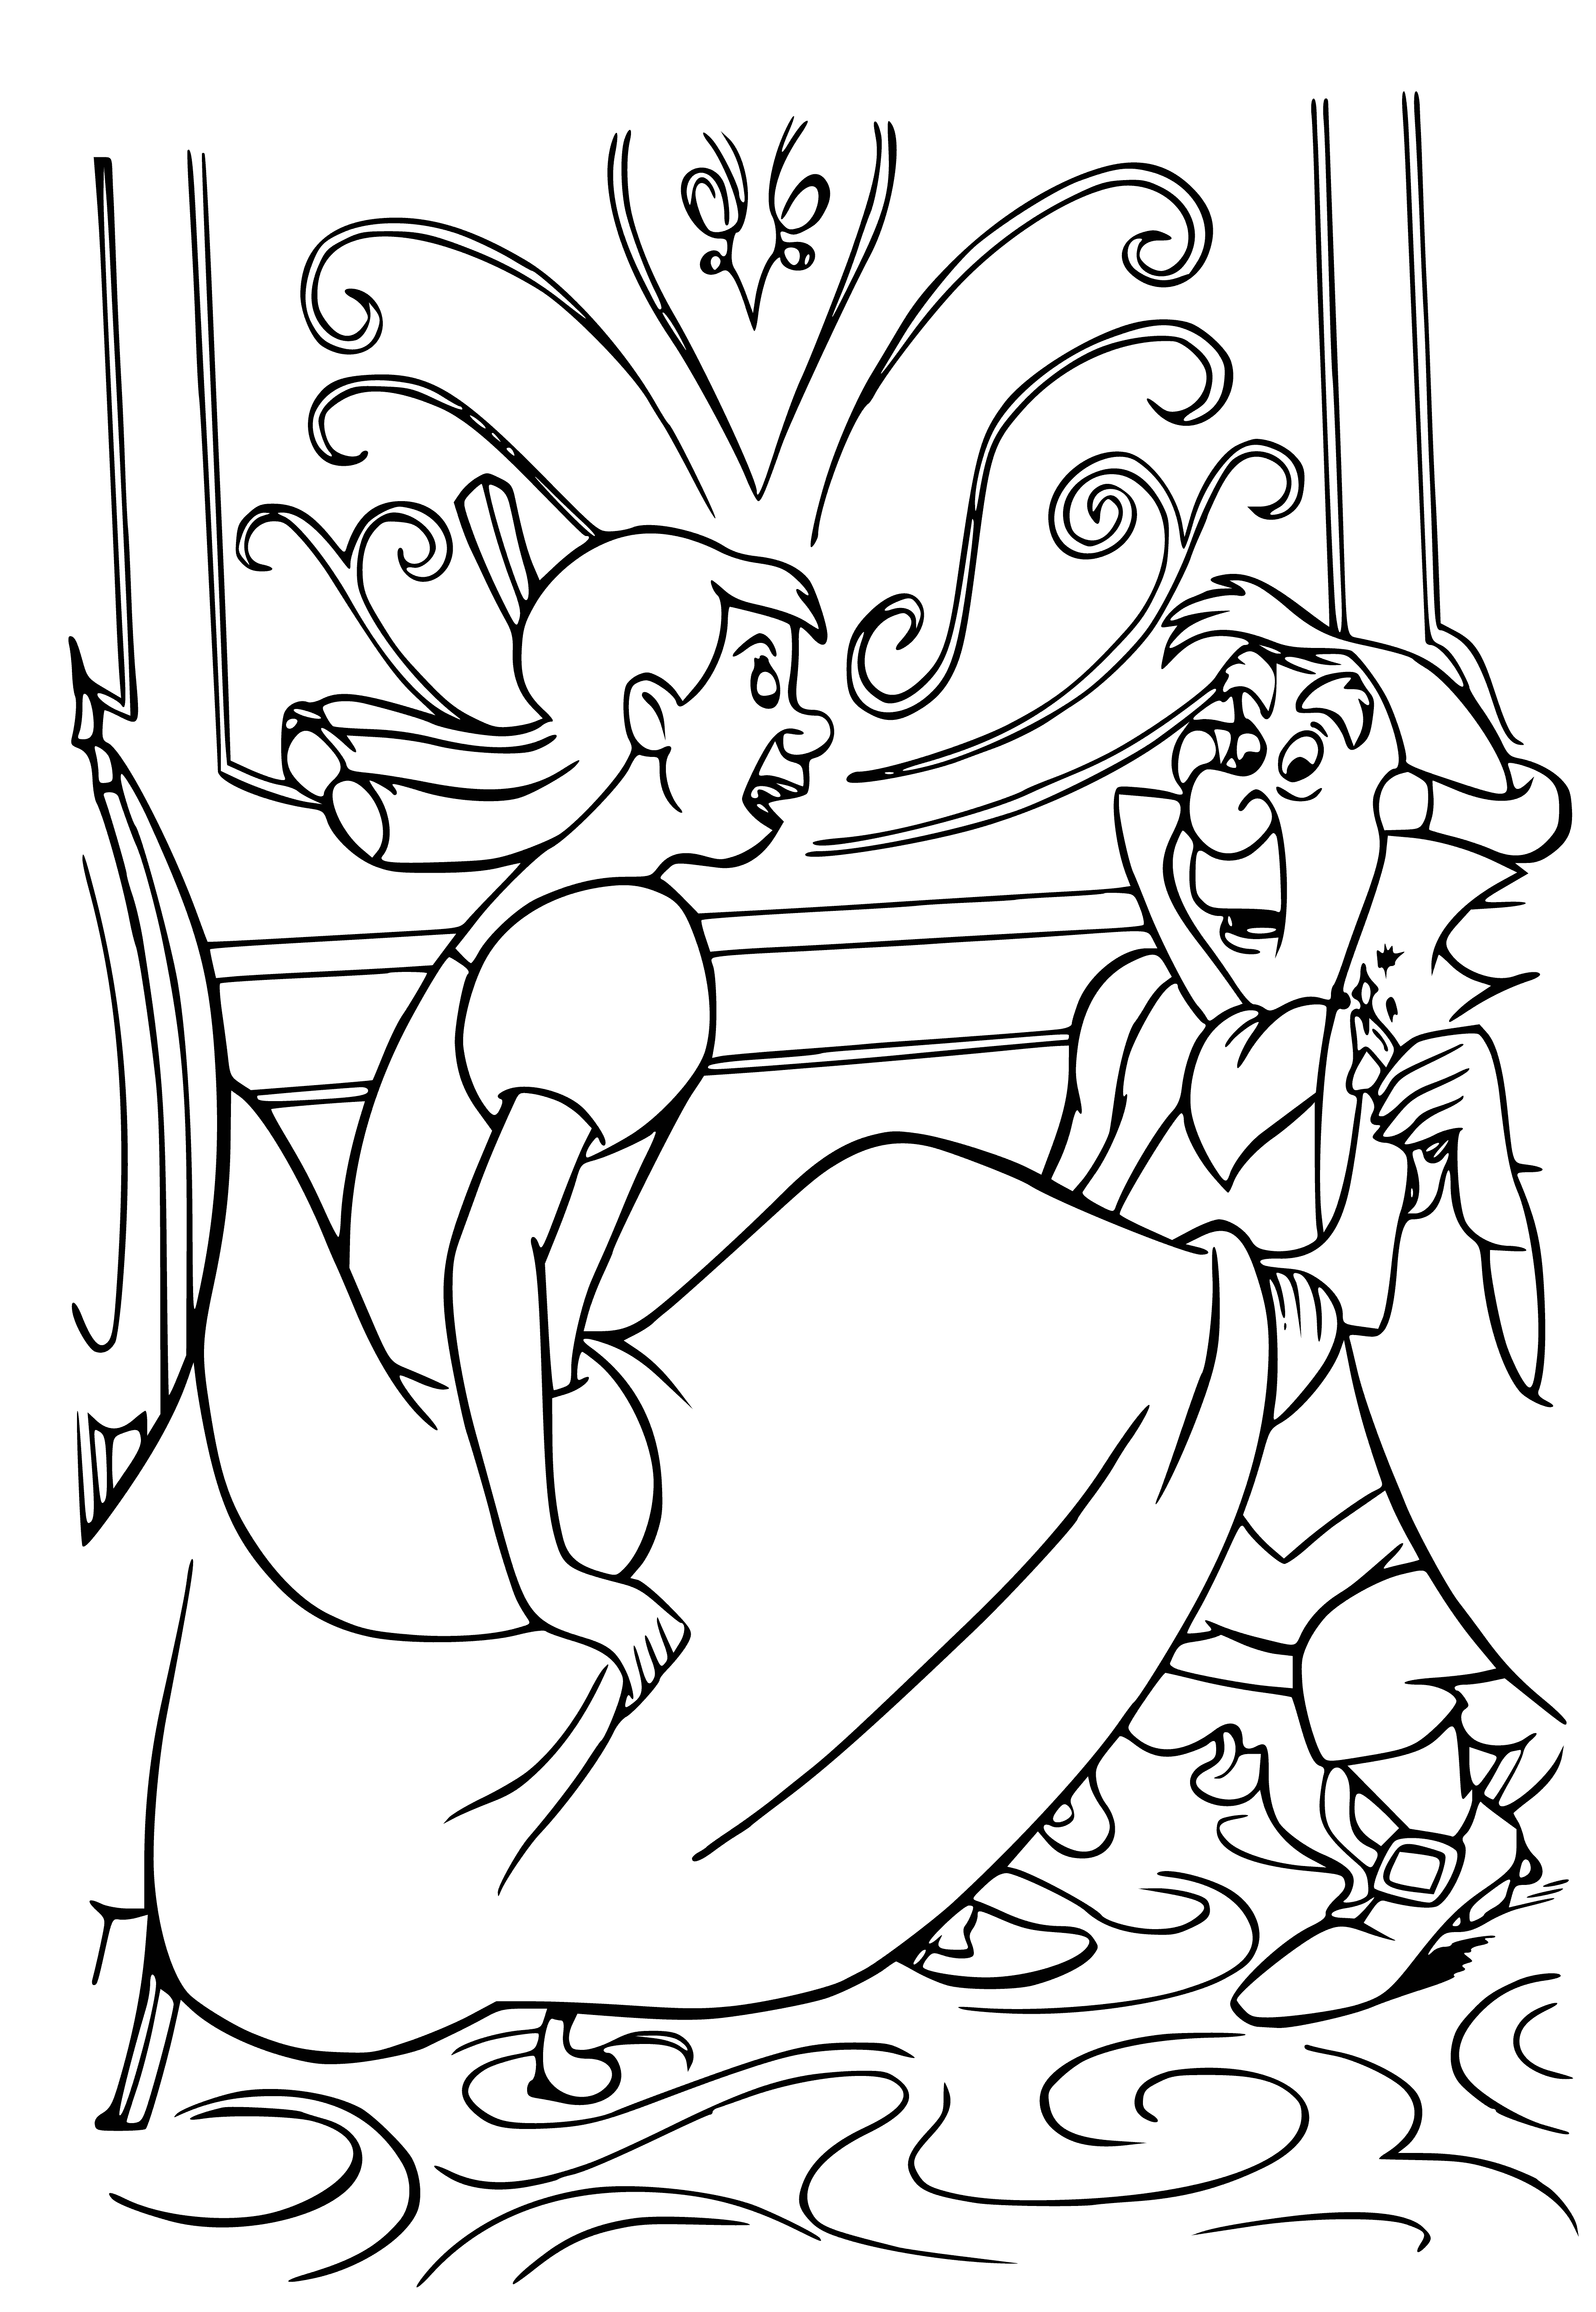 The sisters measure the slipper coloring page